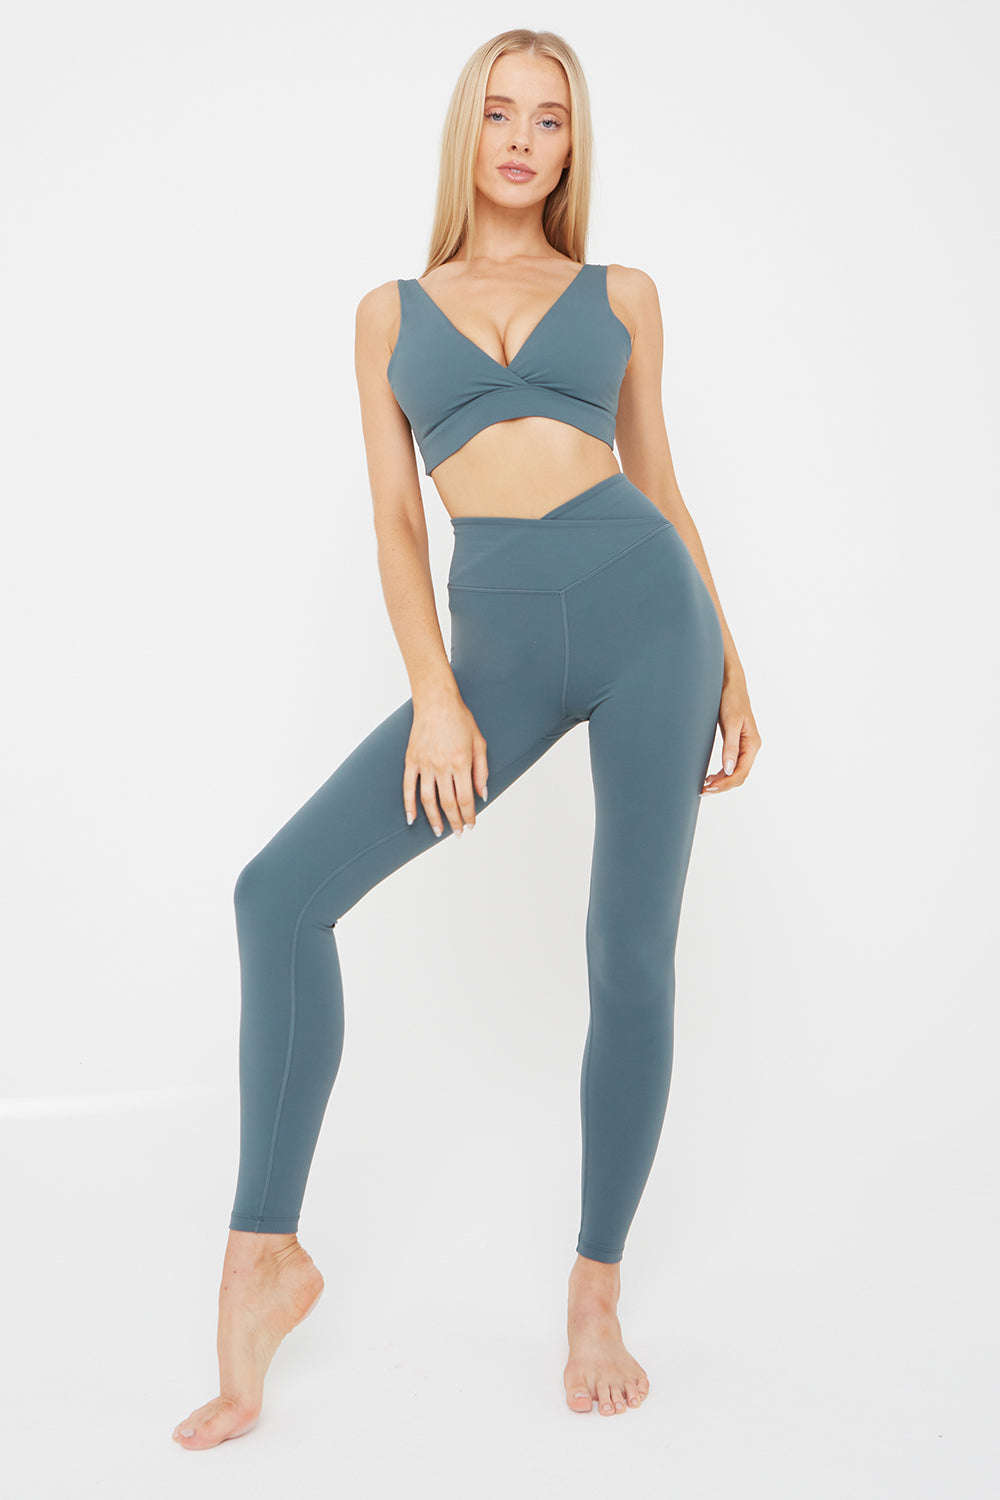 17530- High Waisted Leggings – Trendy Trends Dancewear and Boutique